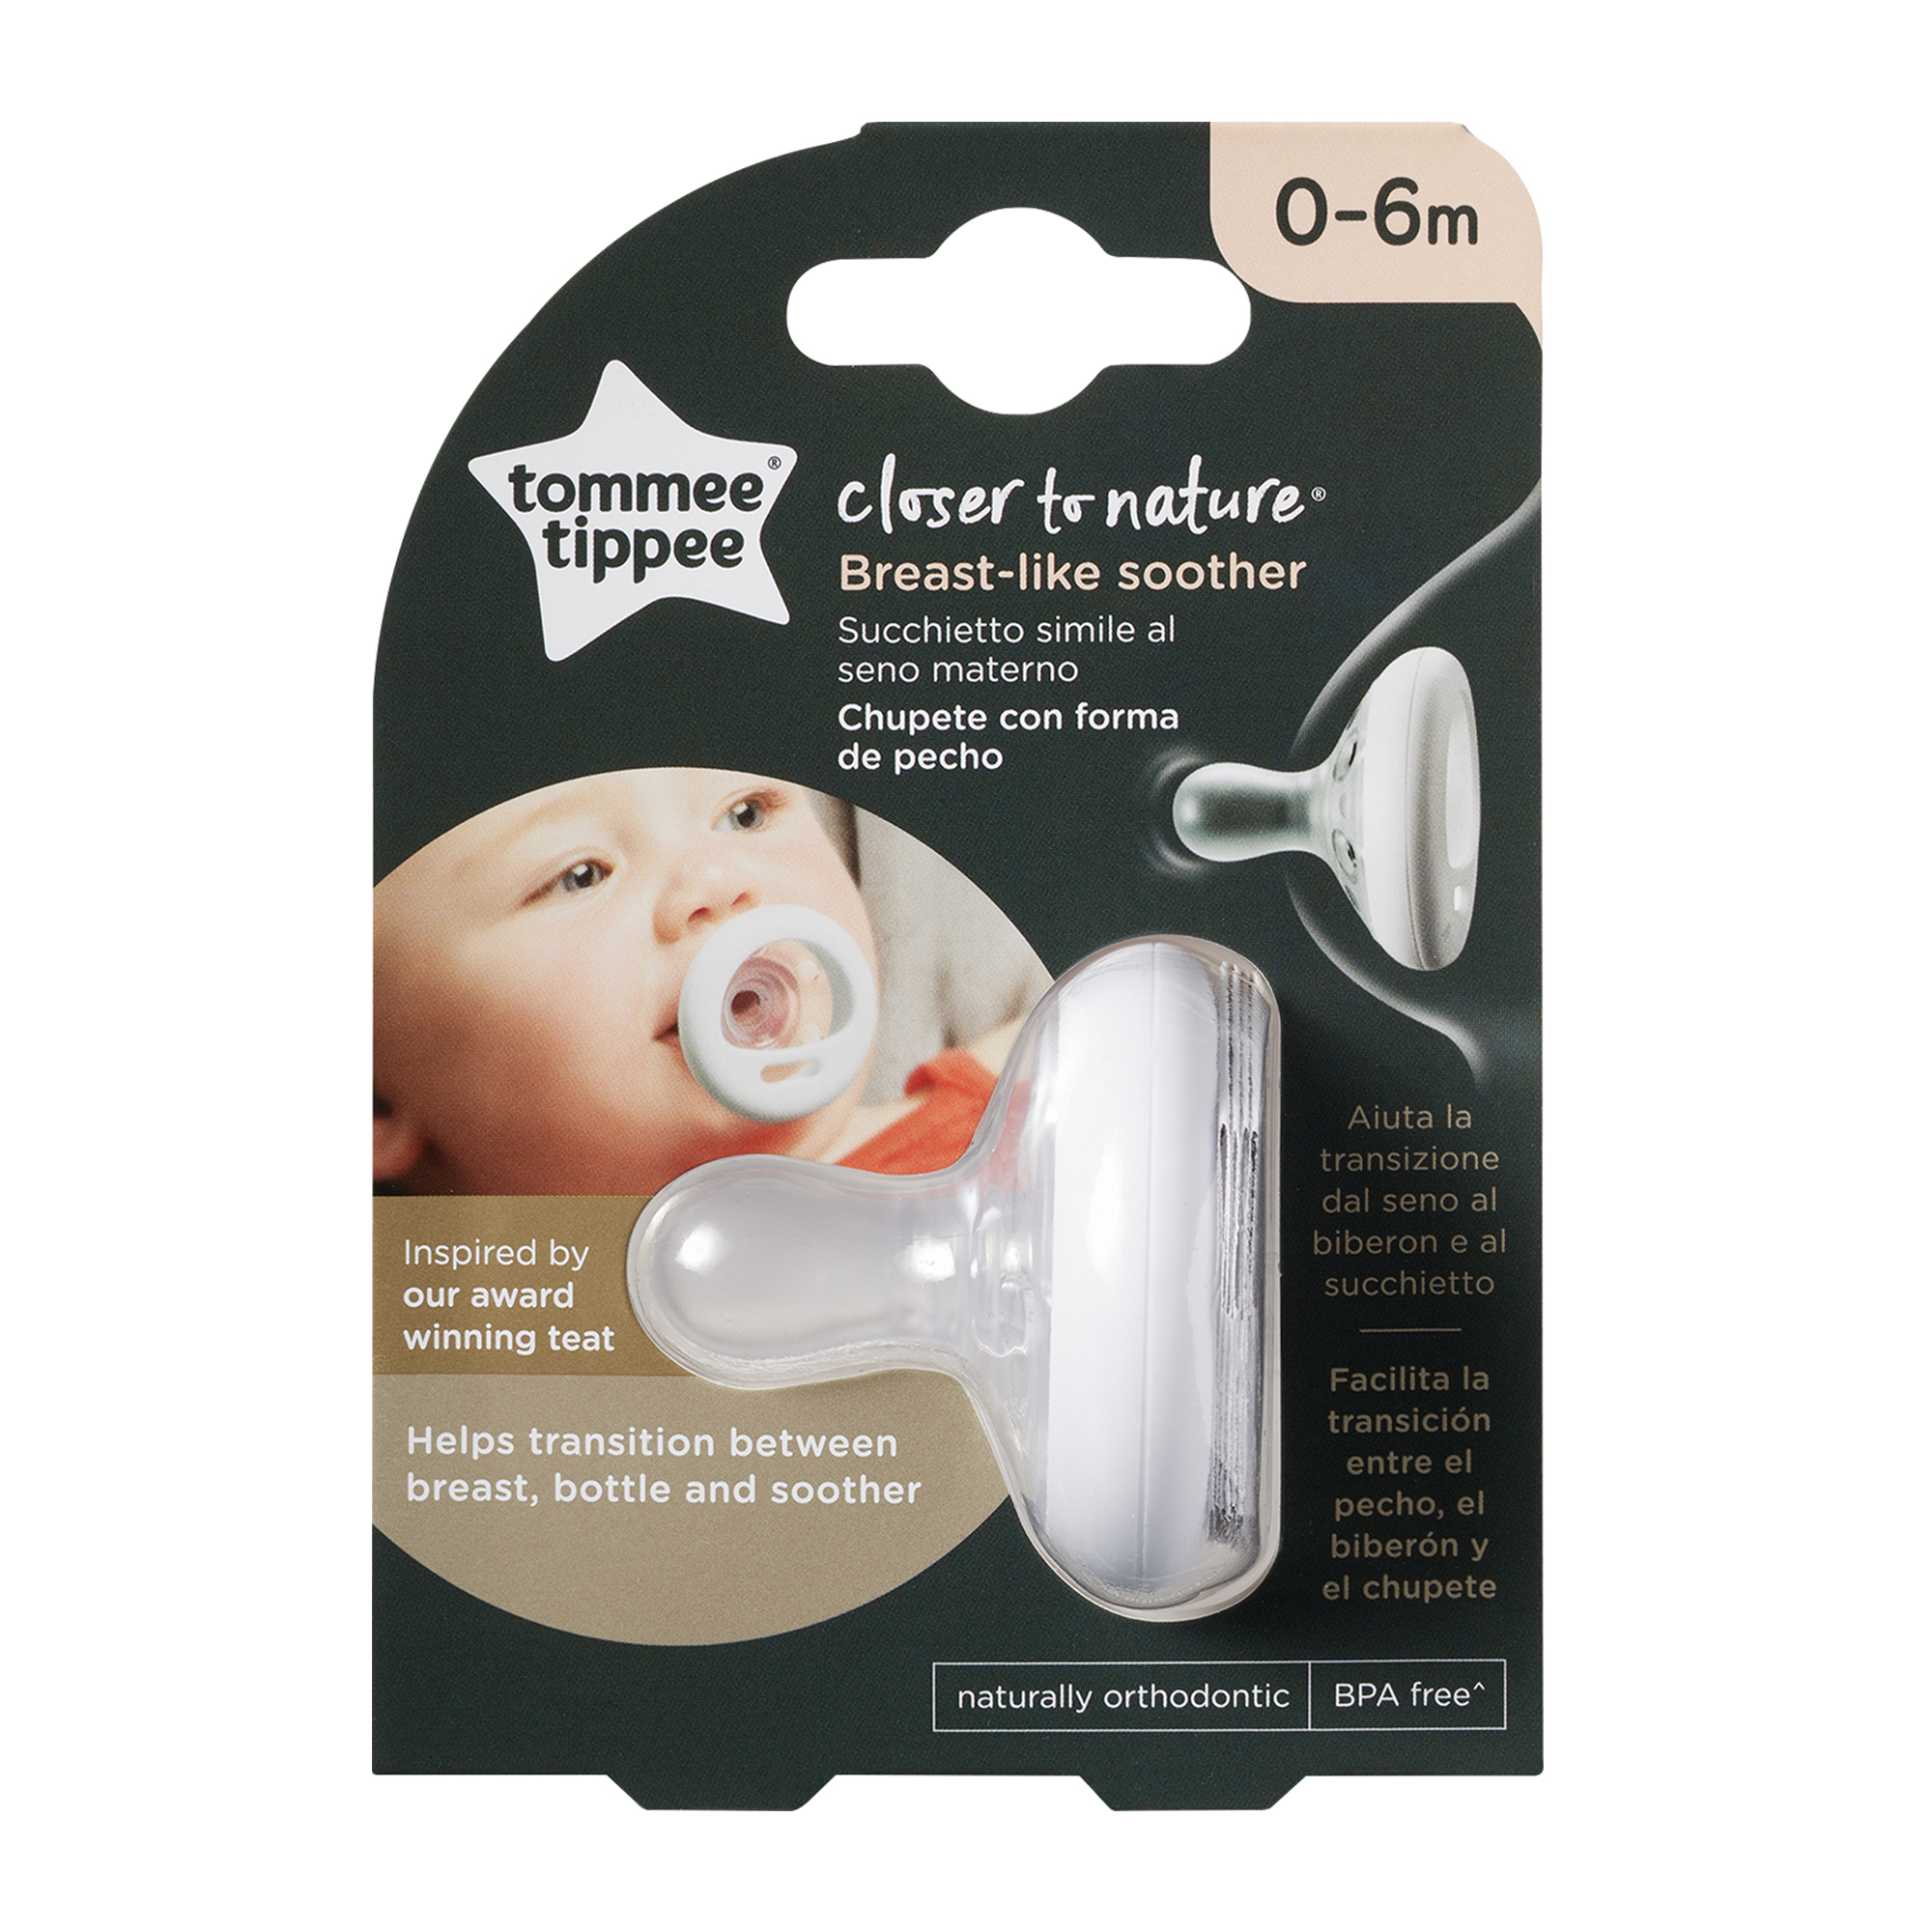 Suzeta, Tommee Tippee, Closer To Nature 0-6 luni x 1 buc image 1